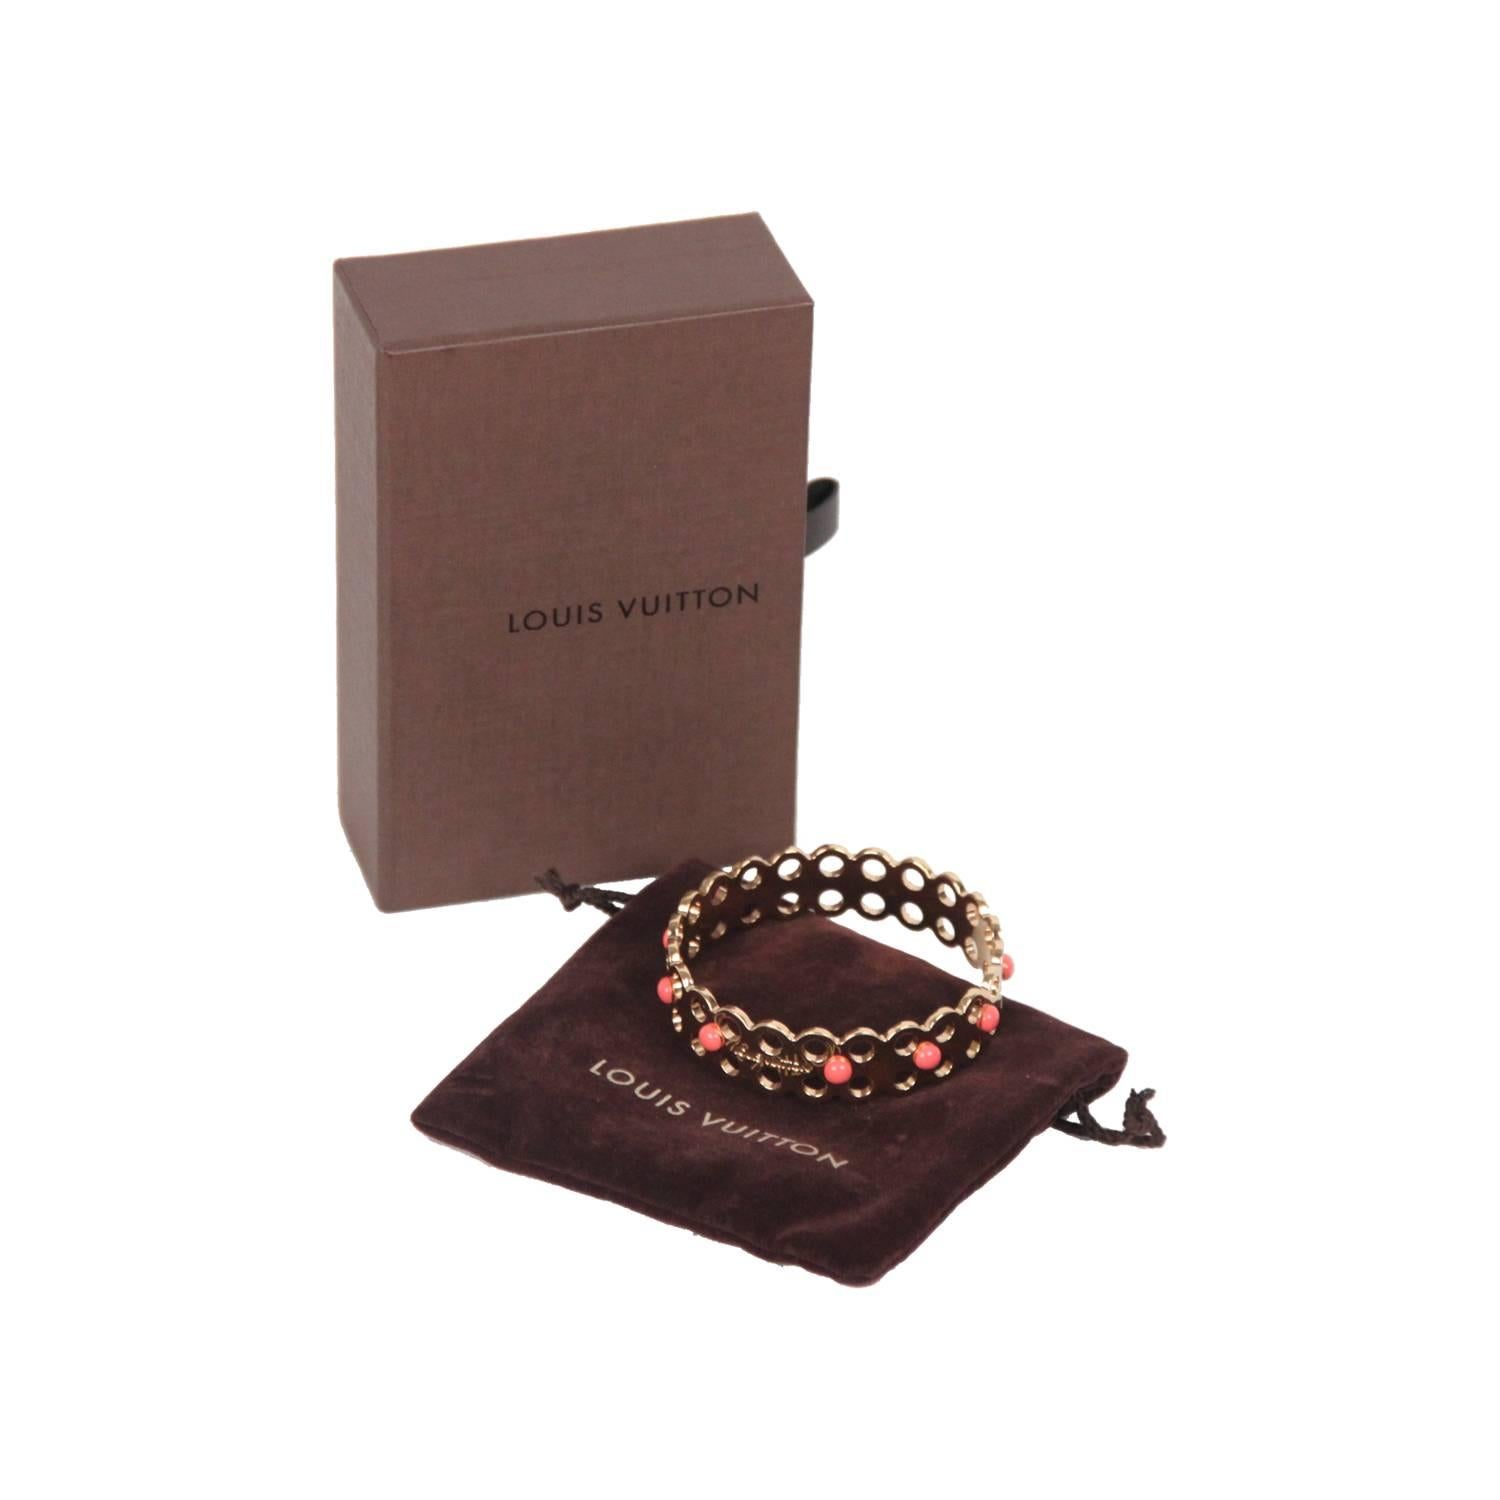 - Louis Vuitton bangle bracelet in gold-tone polihed metal
- Scalloped edges & perforated design
- Louis Vuitton signature engraved on the front
- 11 salmon color cabochon around the bracelet
- Come with original LOUIS VUITTON box &